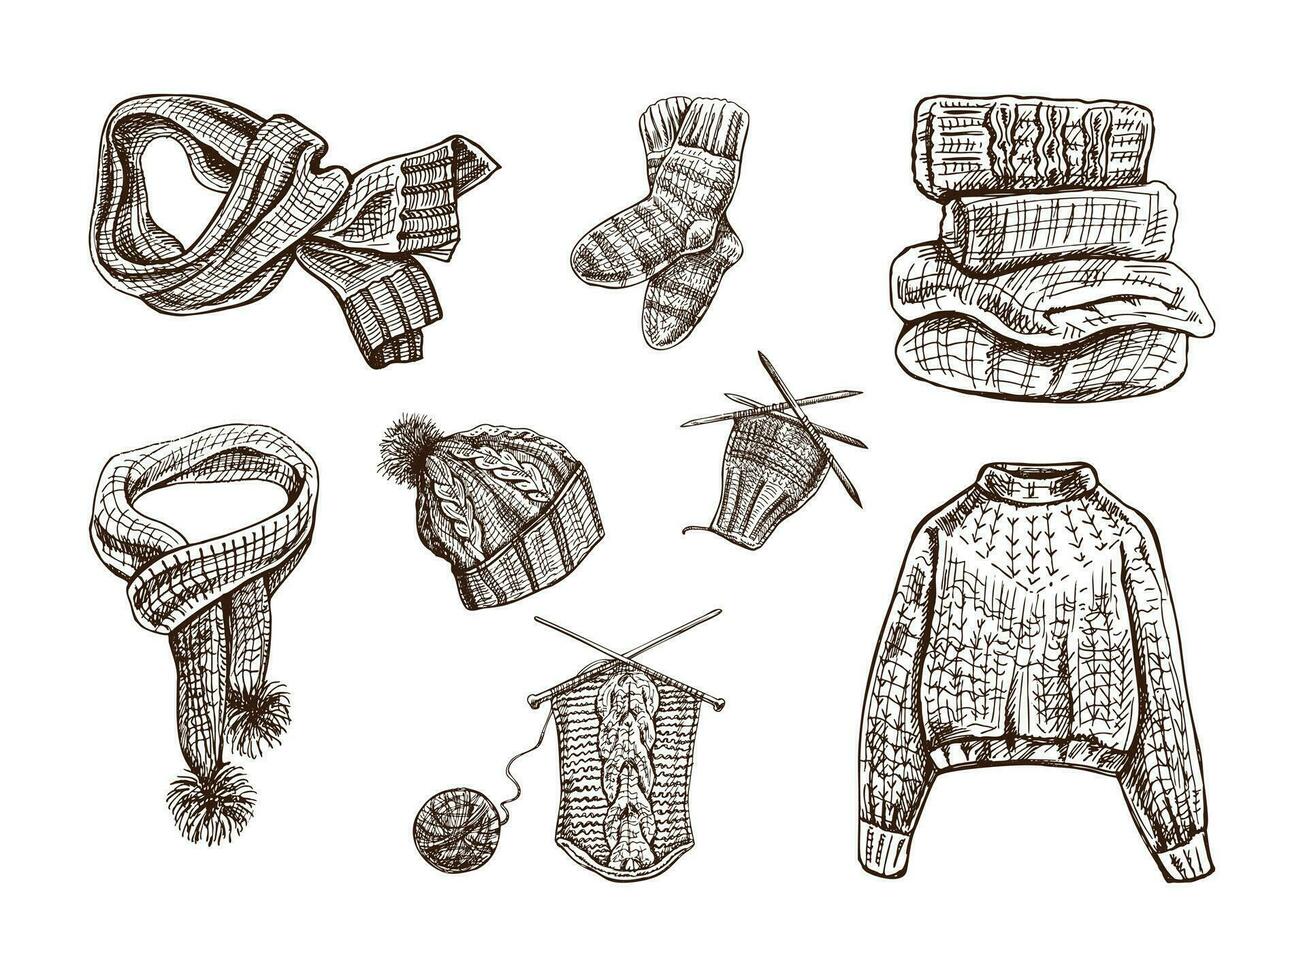 Vintage set of hand drawn knitted sweater, socks, scarf, hat, knitting process icons. Vector illustrations in sketch style. Handmade, sewing equipment concept in vintage doodle style. Engraving style.